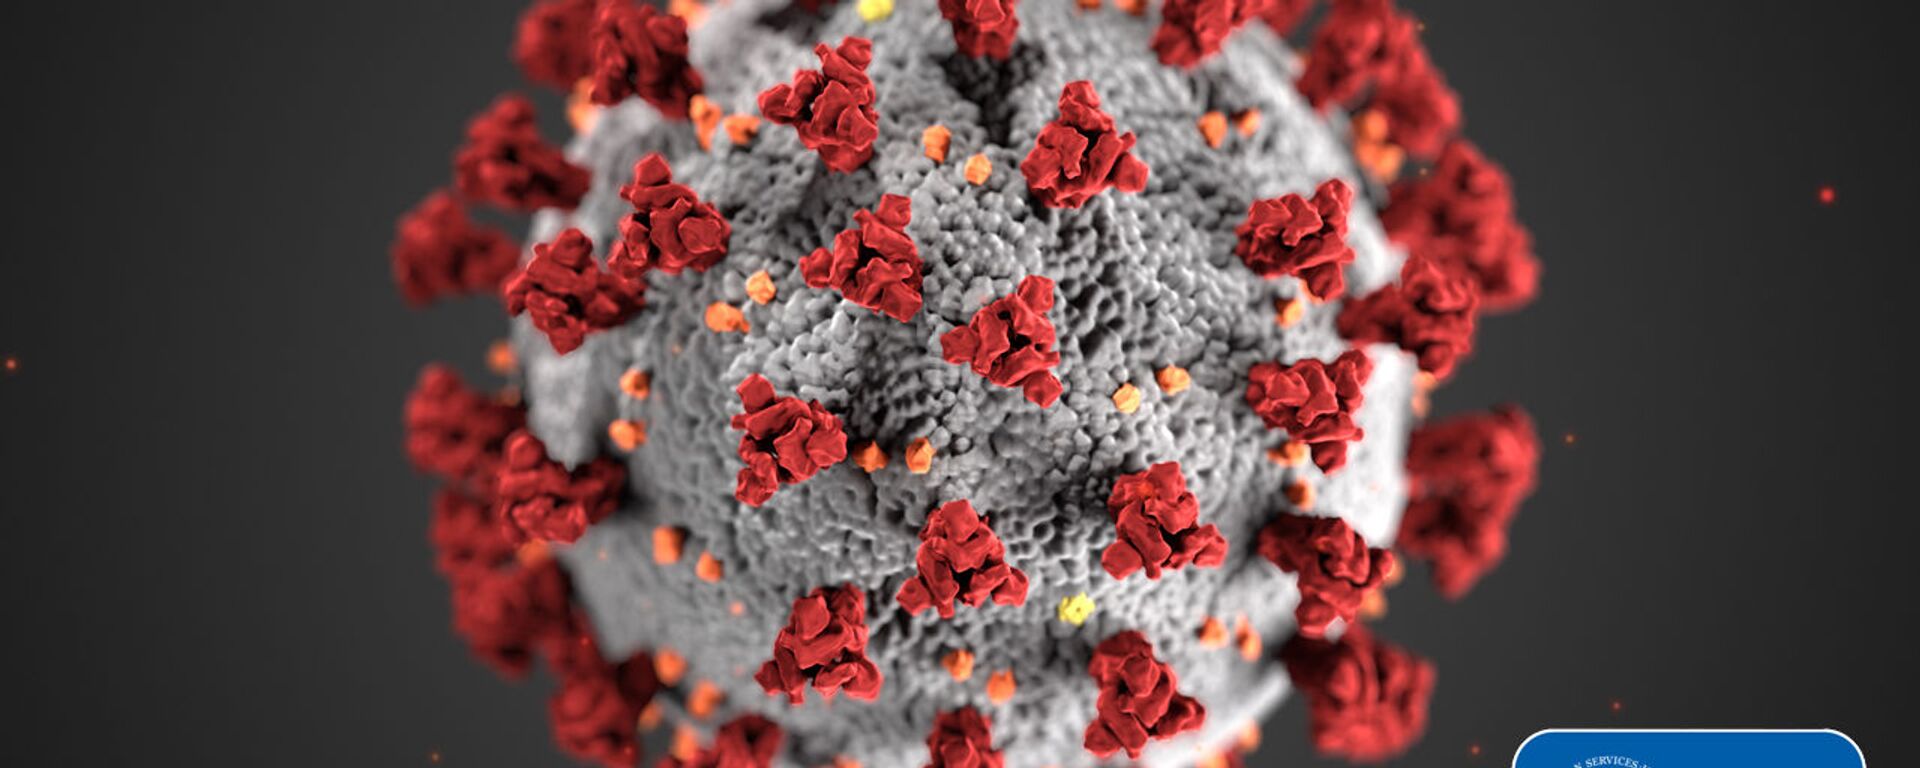 This illustration, created at the Centers for Disease Control and Prevention (CDC), reveals ultrastructural morphology exhibited by coronaviruses. Note the spikes that adorn the outer surface of the virus, which impart the look of a corona surrounding the virion, when viewed electron microscopically. A novel coronavirus, named Severe Acute Respiratory Syndrome coronavirus 2 (SARS-CoV-2), was identified as the cause of an outbreak of respiratory illness first detected in Wuhan, China in 2019. The illness caused by this virus has been named coronavirus disease 2019 (COVID-19). - Sputnik International, 1920, 07.07.2020